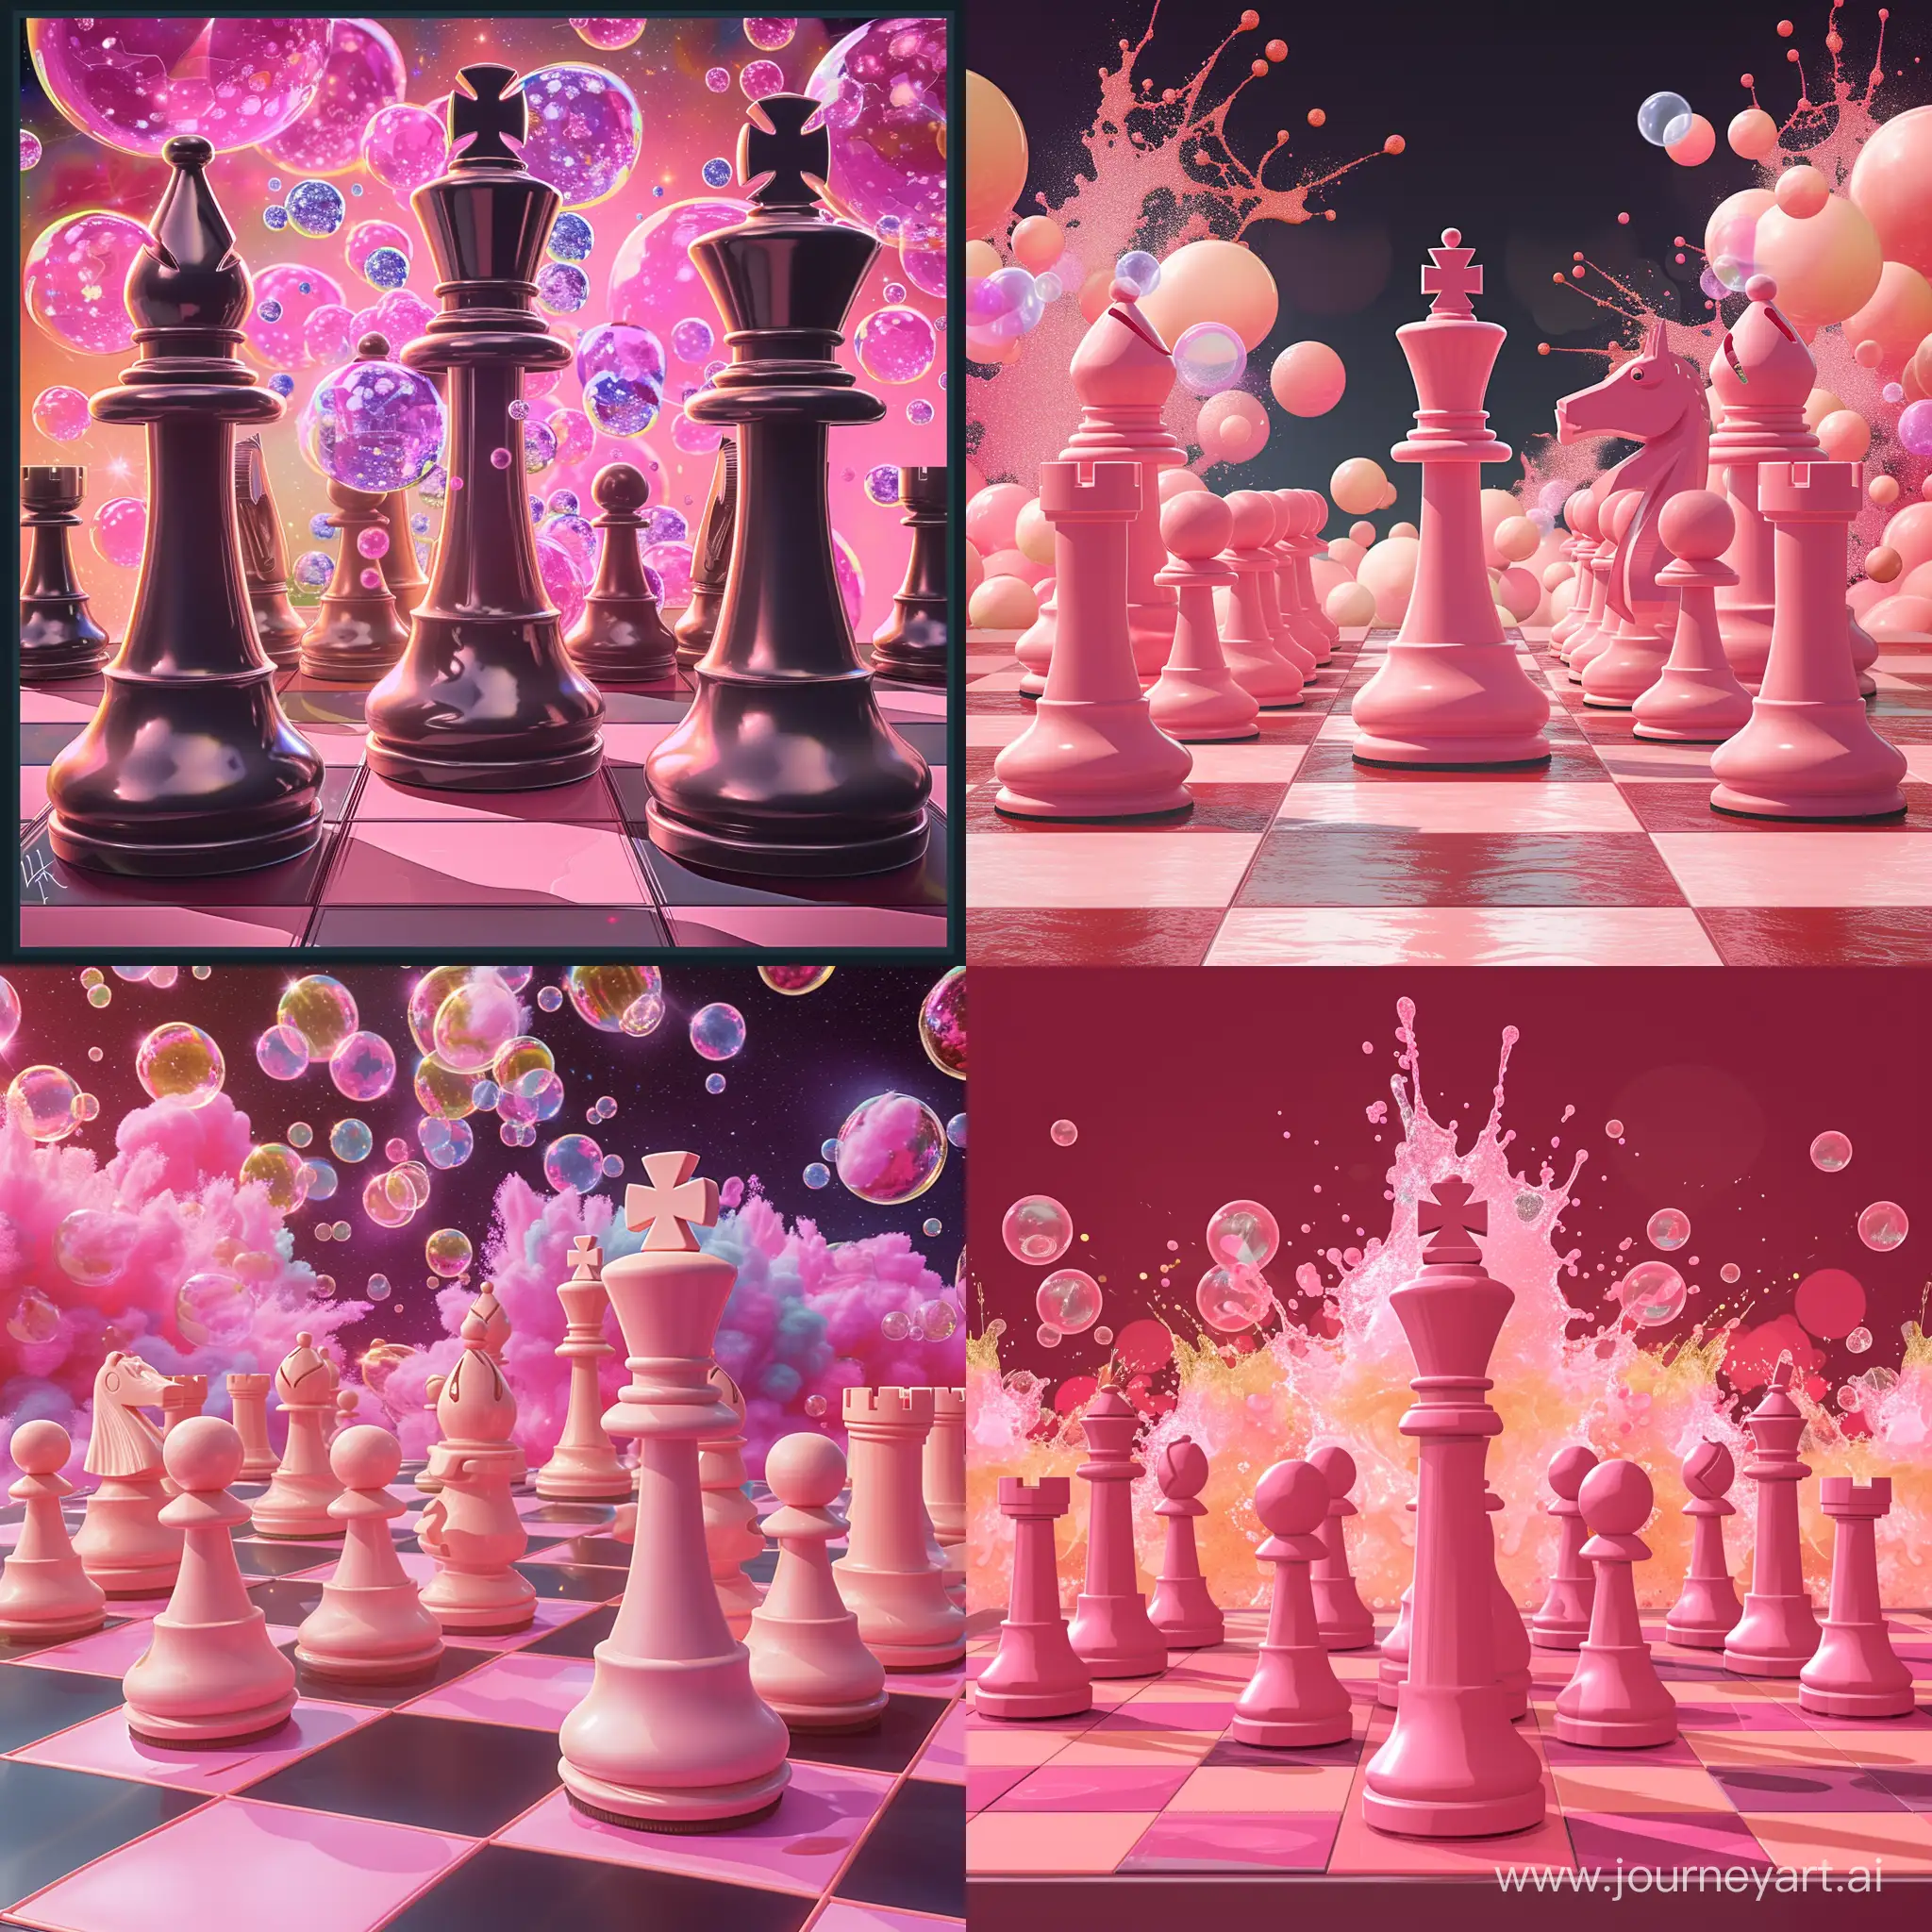 Design an 8x8 chessboard for an Elixir Games-themed auto chess arena. Embrace the Elixir universe with a vibrant pink color scheme and an enchanting background featuring exploding bubbles. Infuse the essence of Elixir Games into the chessboard's aesthetic, creating a visually captivating environment that reflects the magical and dynamic nature of the game. Ensure the design incorporates the 8x8 grid seamlessly, and let the pink hues and bursting bubbles transport players into the mystical realm of Elixir Games.